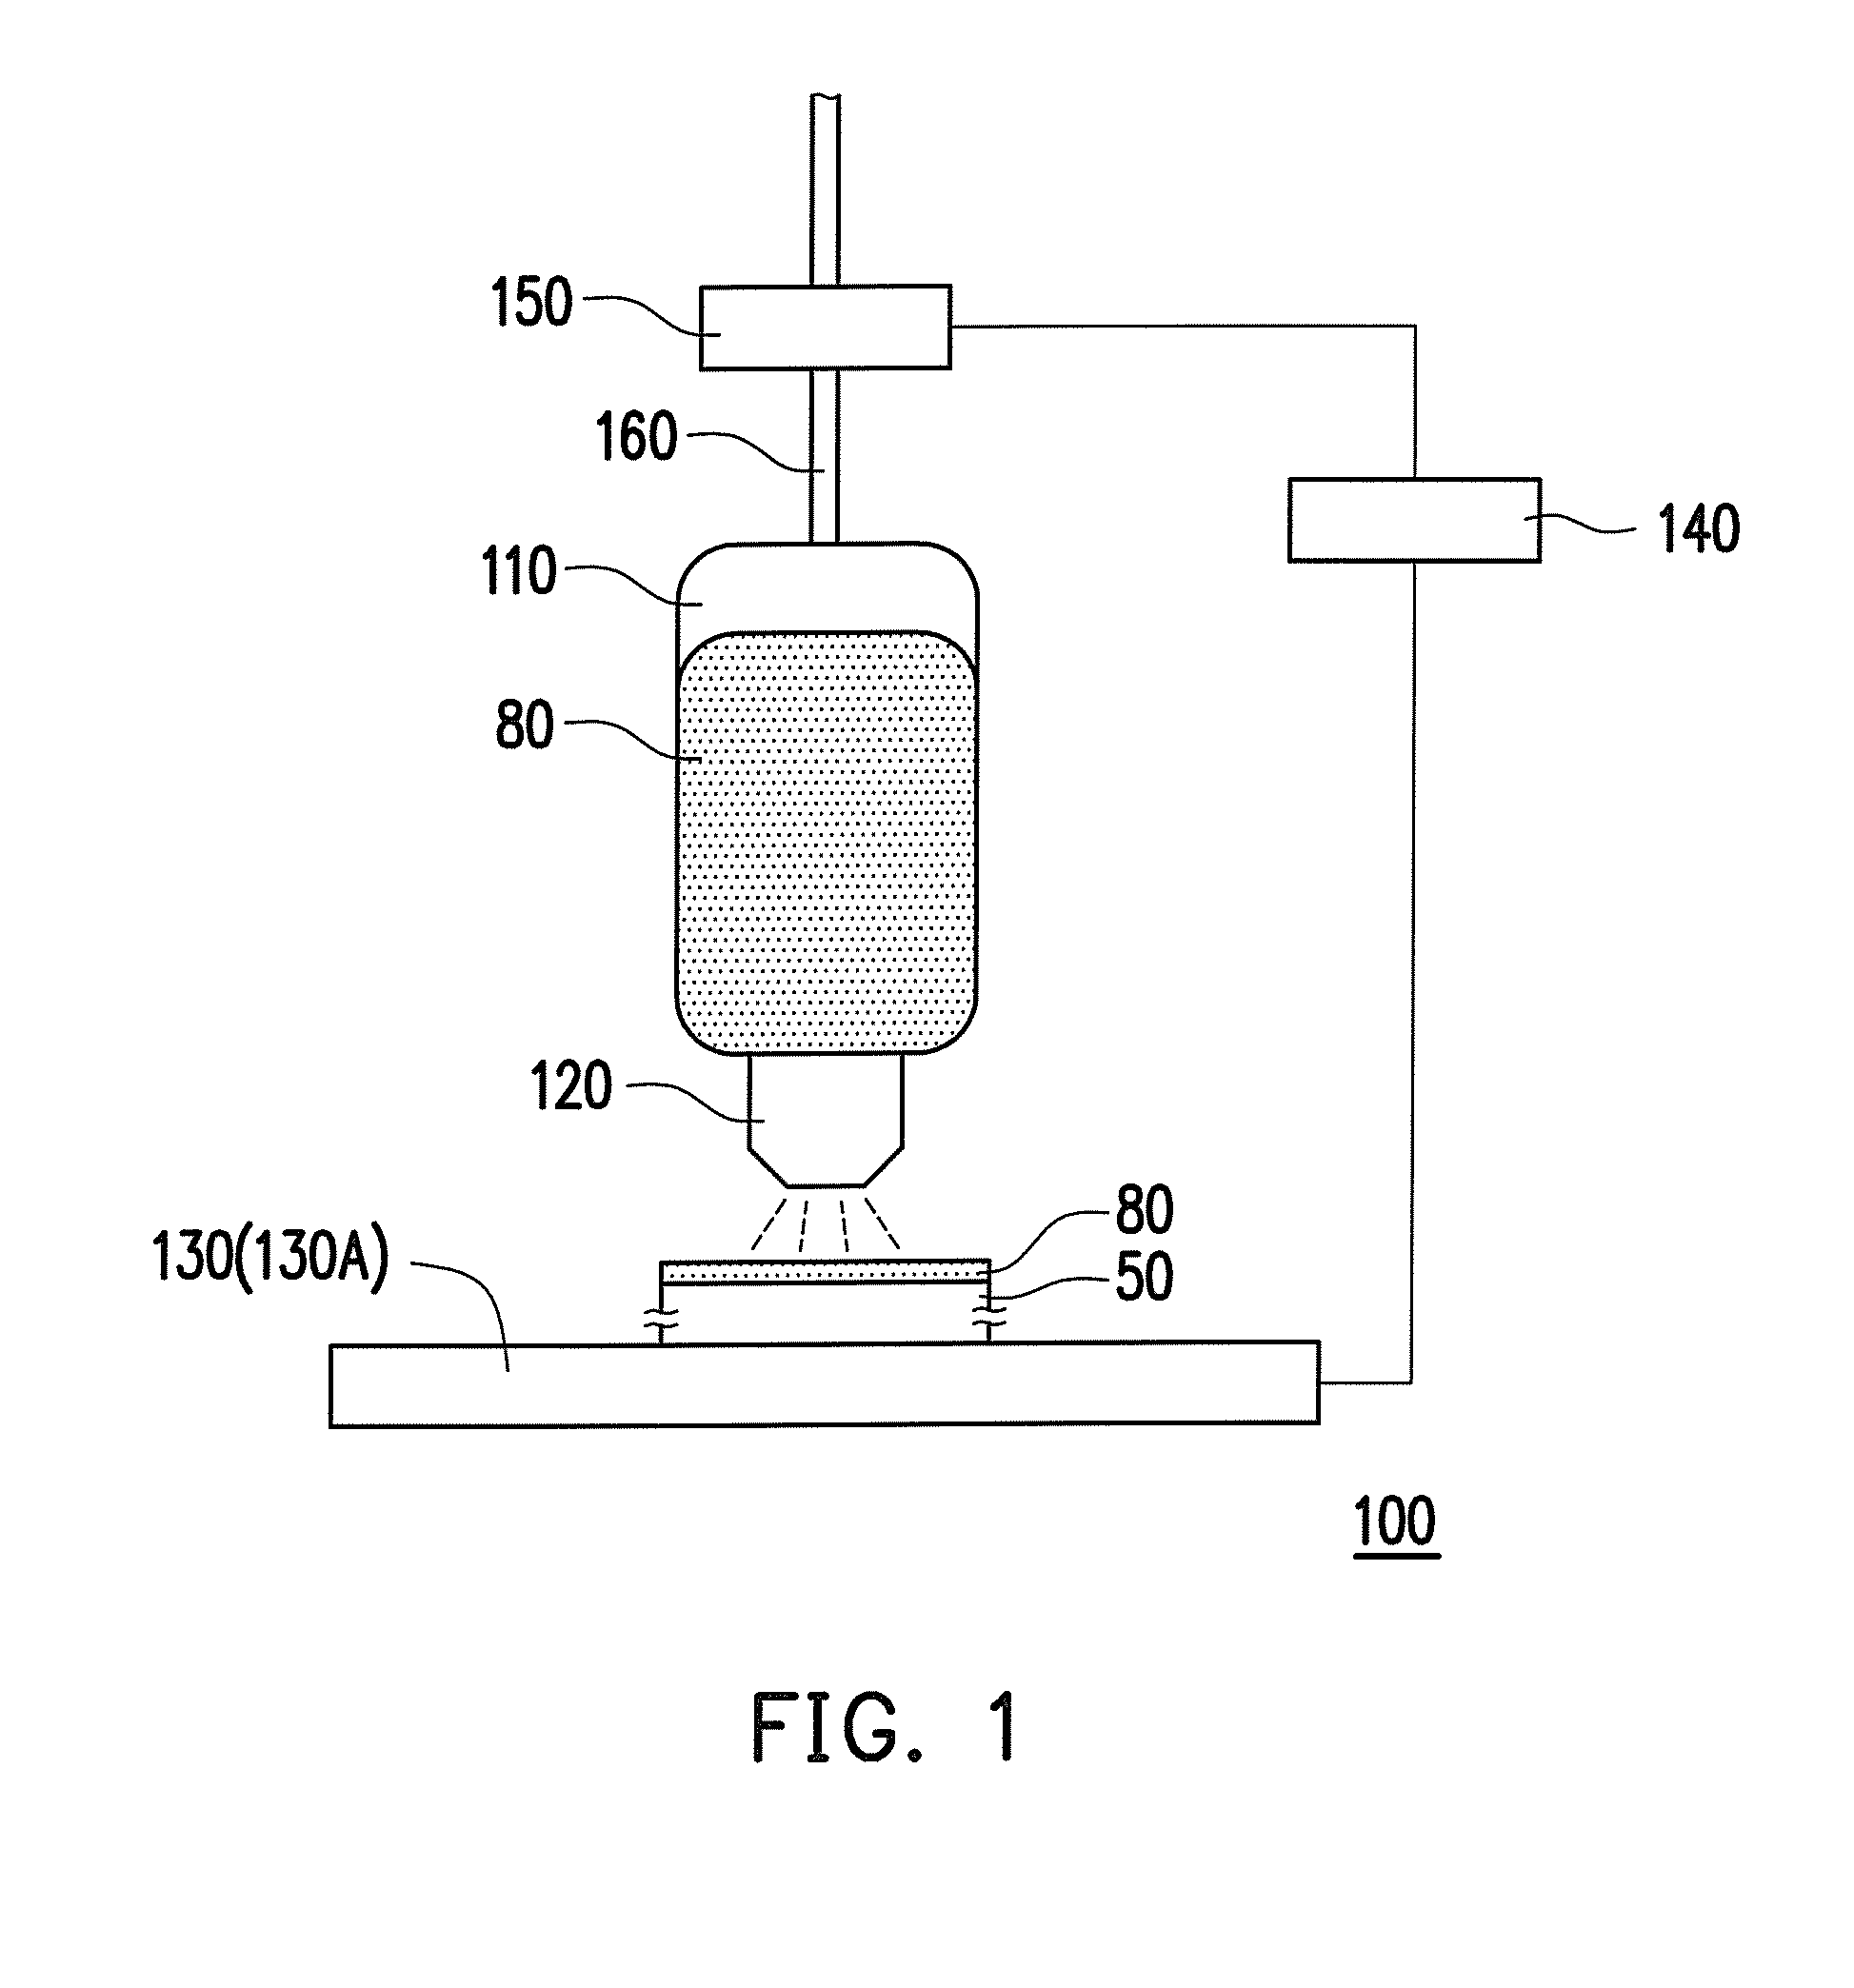 Method of forming a layer of glue on a work piece